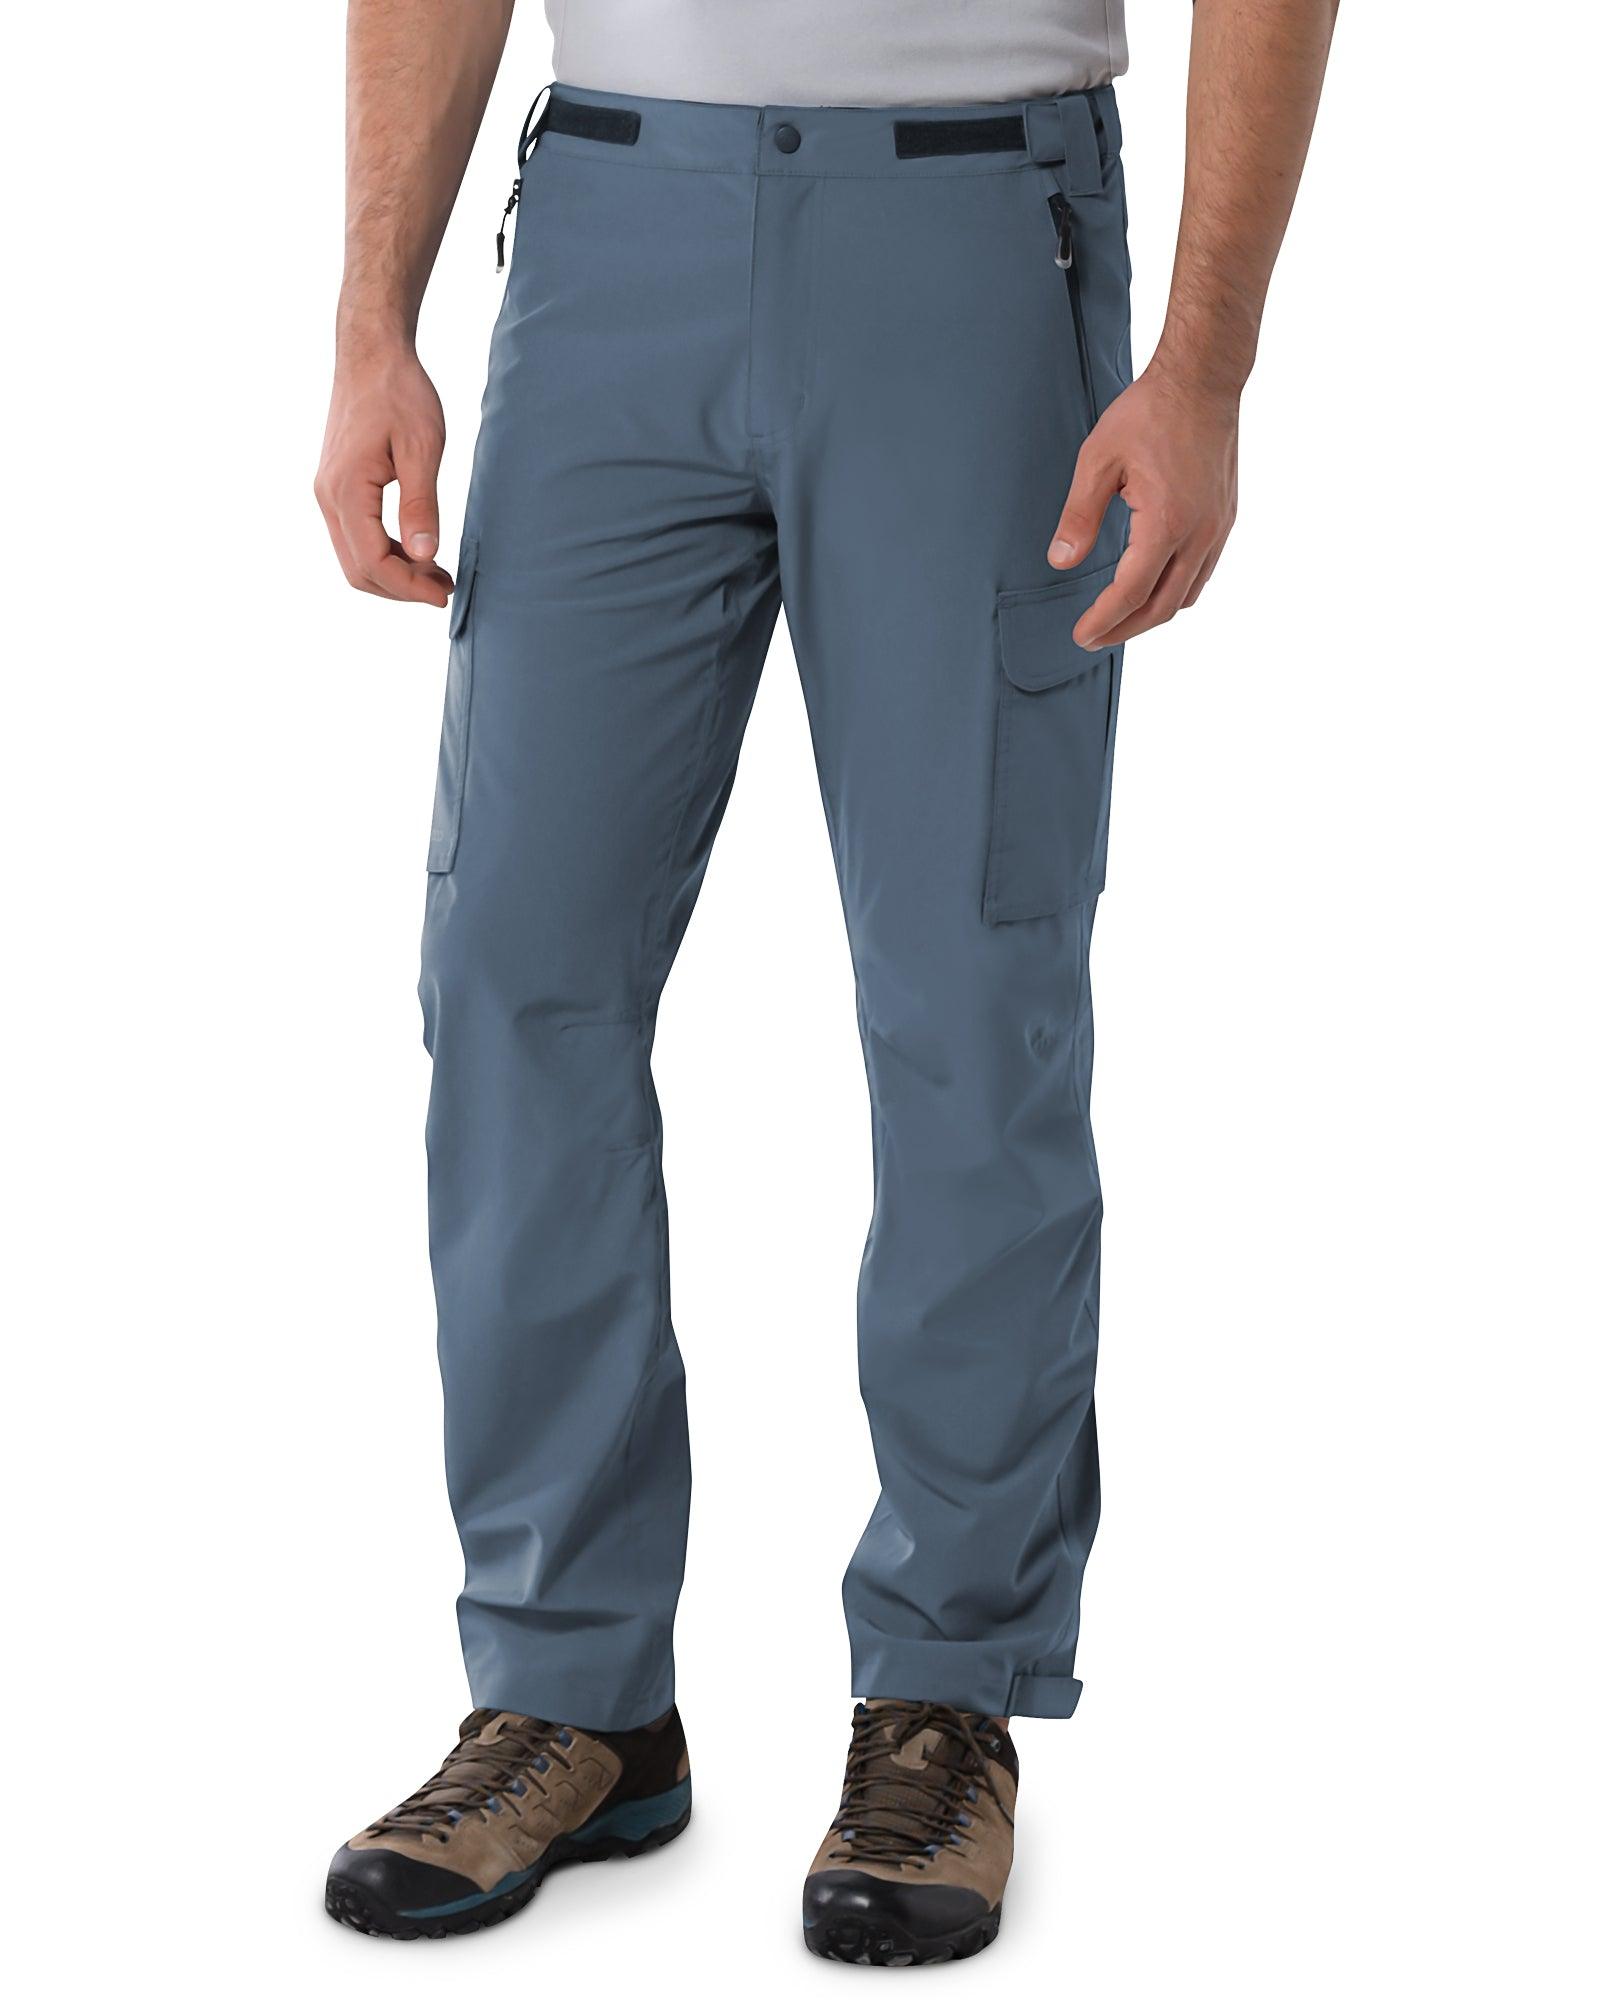 Multi Pocket Best Quality and Comfortable Cargo Men's Three Fourth Pants